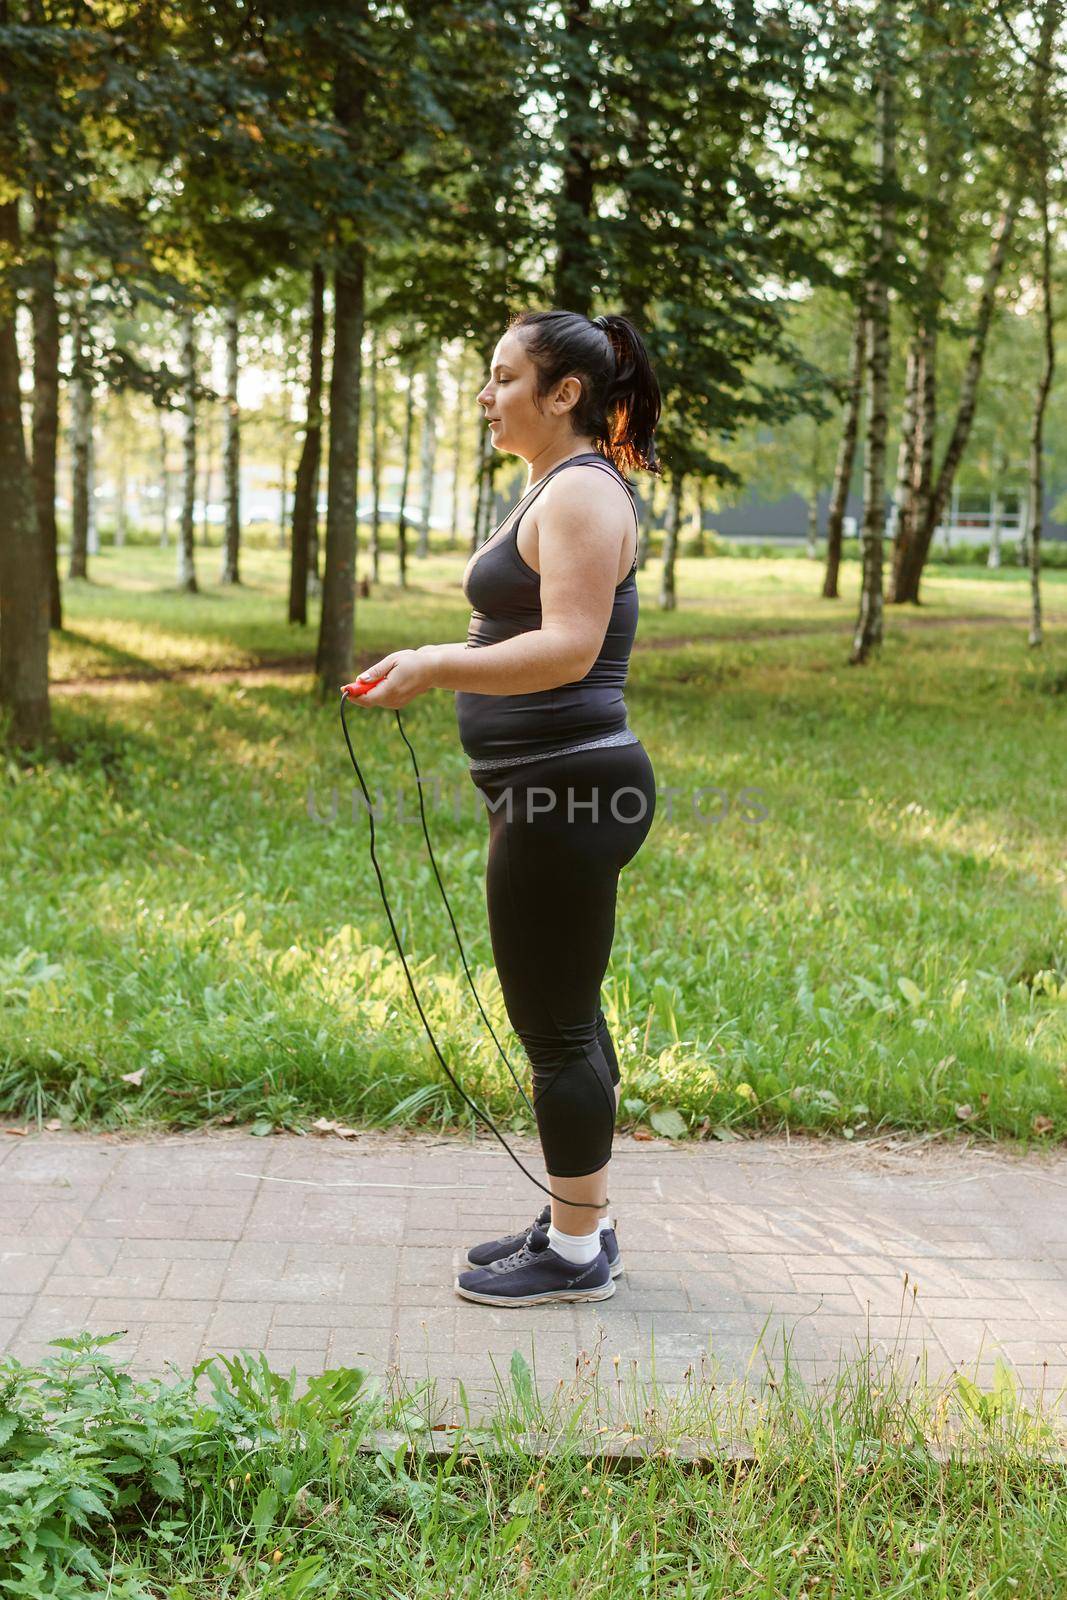 A charming brunette woman plus-size body positive practices sports in nature.